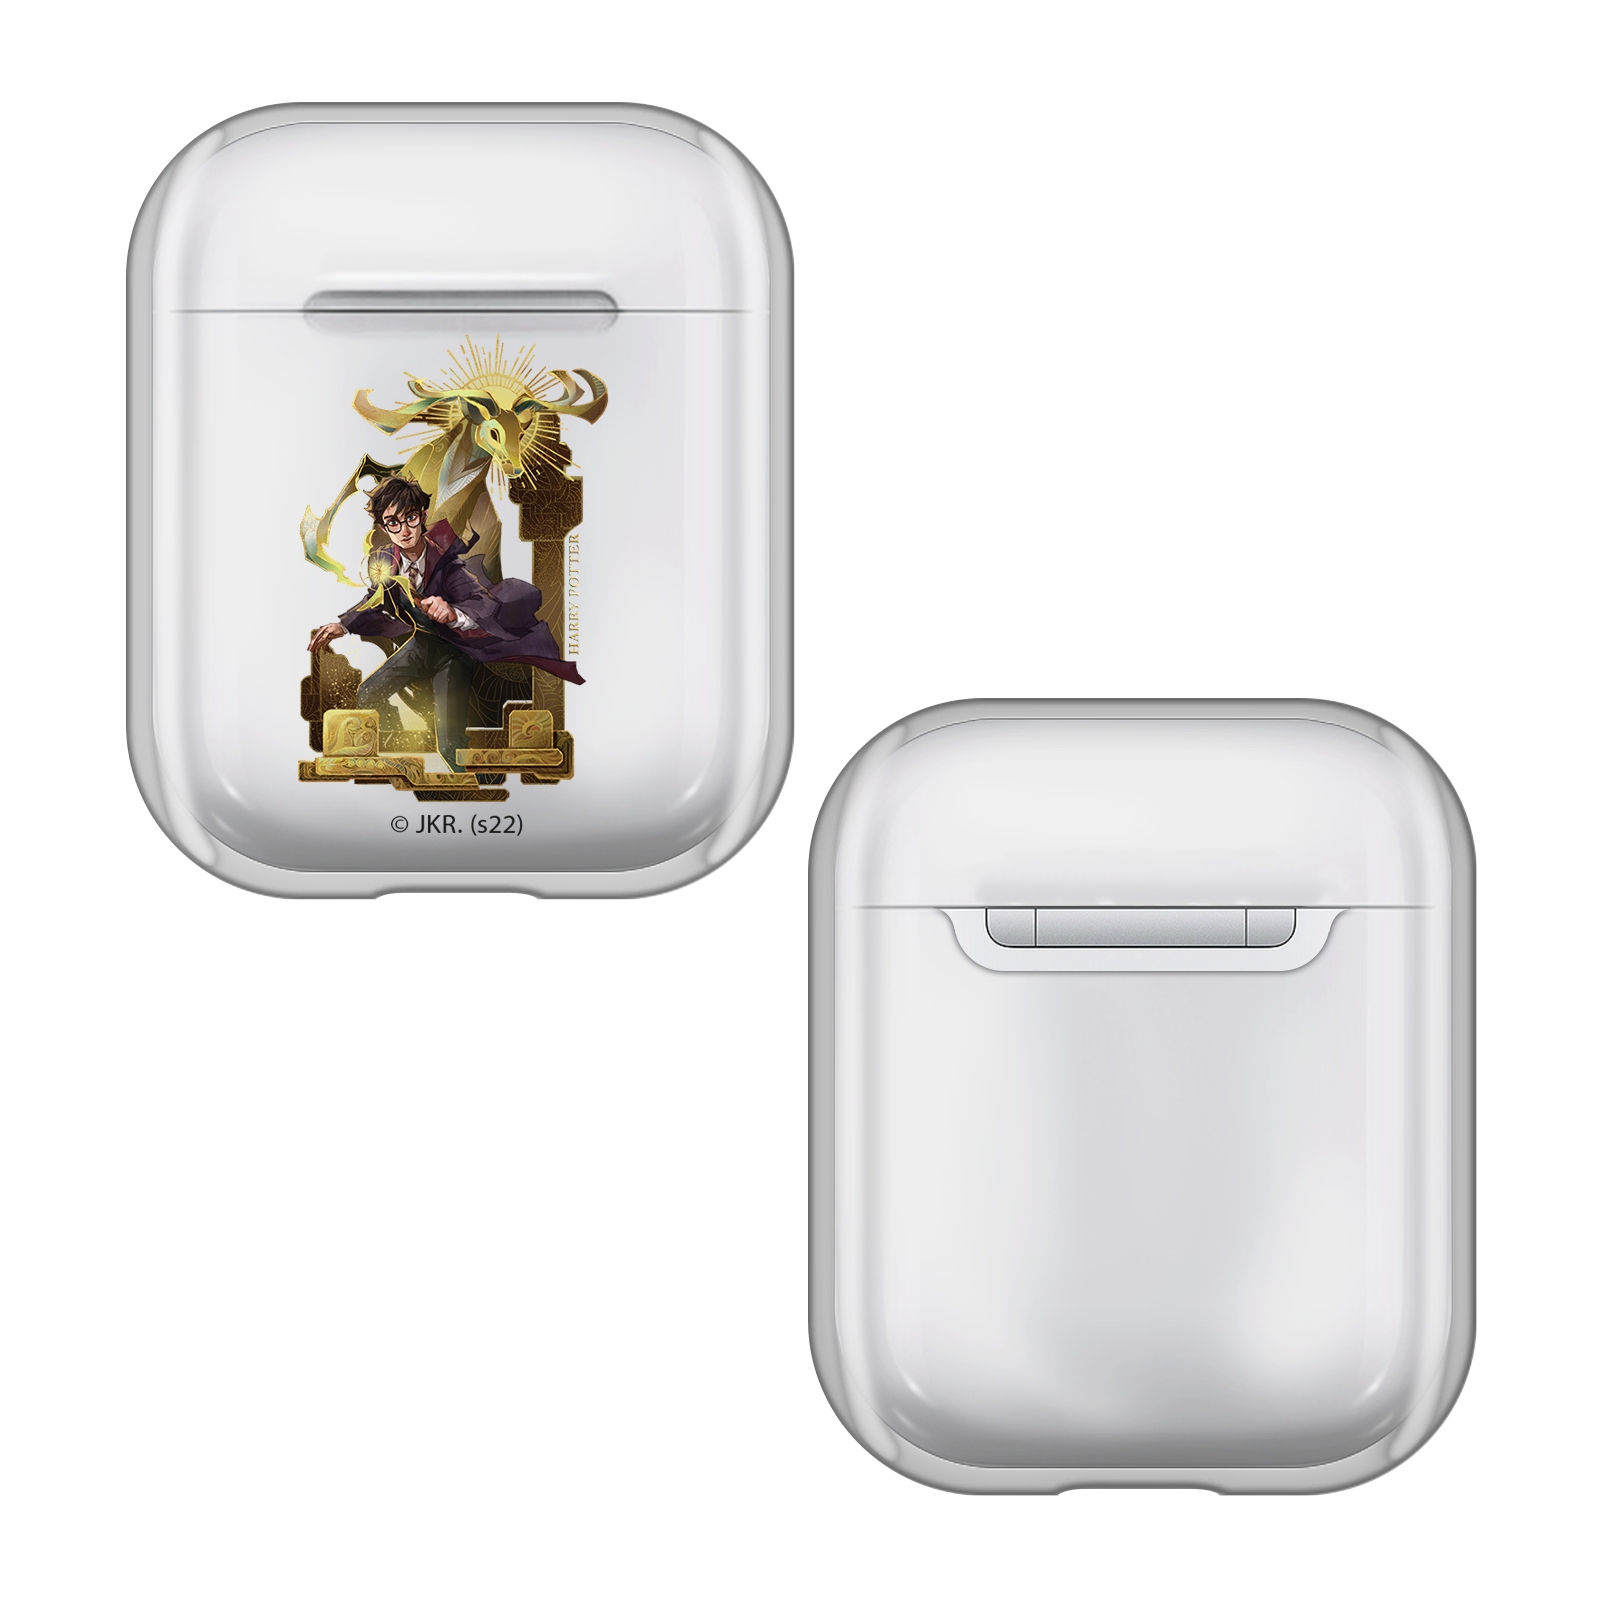 boxing Center Africa HARRY POTTER: MAGIC AWAKENED CHARACTERS CLEAR HARD CRYSTAL FOR AIRPODS CASE  | eBay